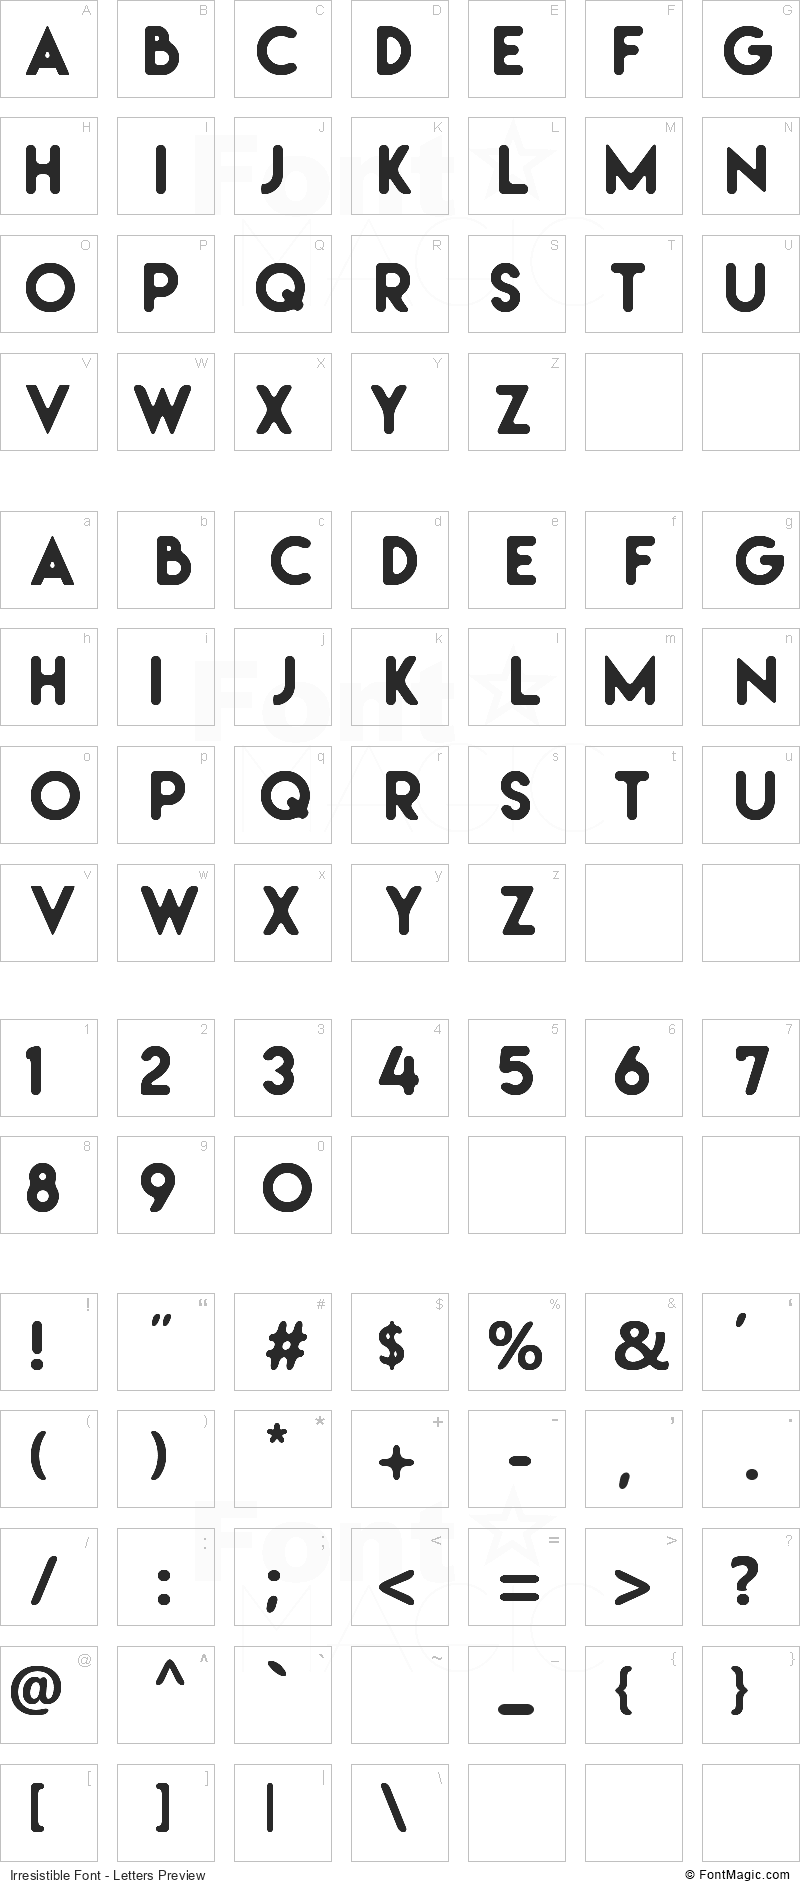 Irresistible Font - All Latters Preview Chart